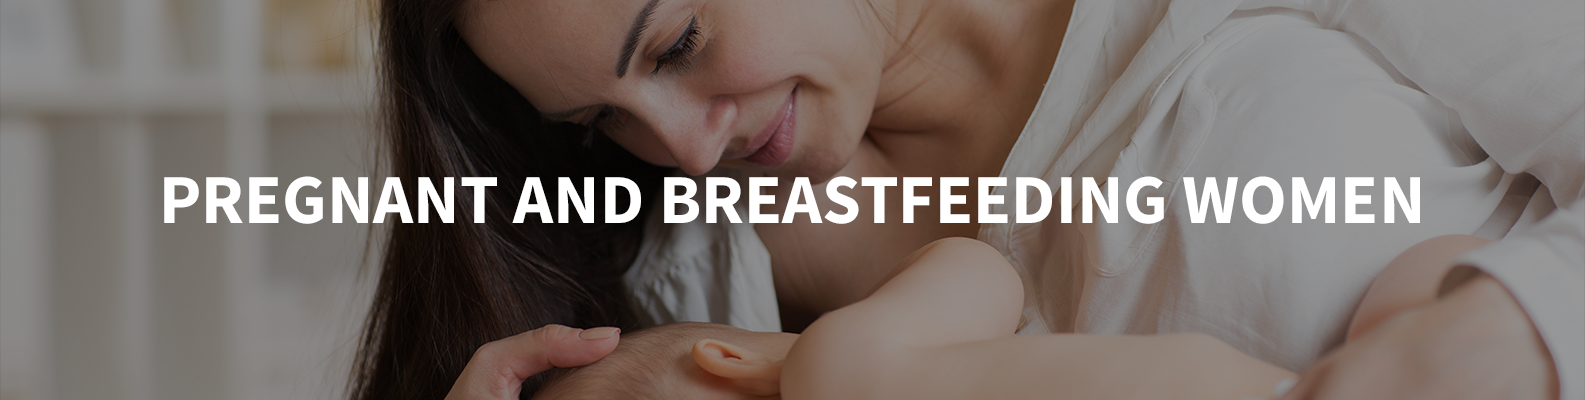 woman lying down looking at baby, text across image reads: Pregnant and Breastfeeding Women